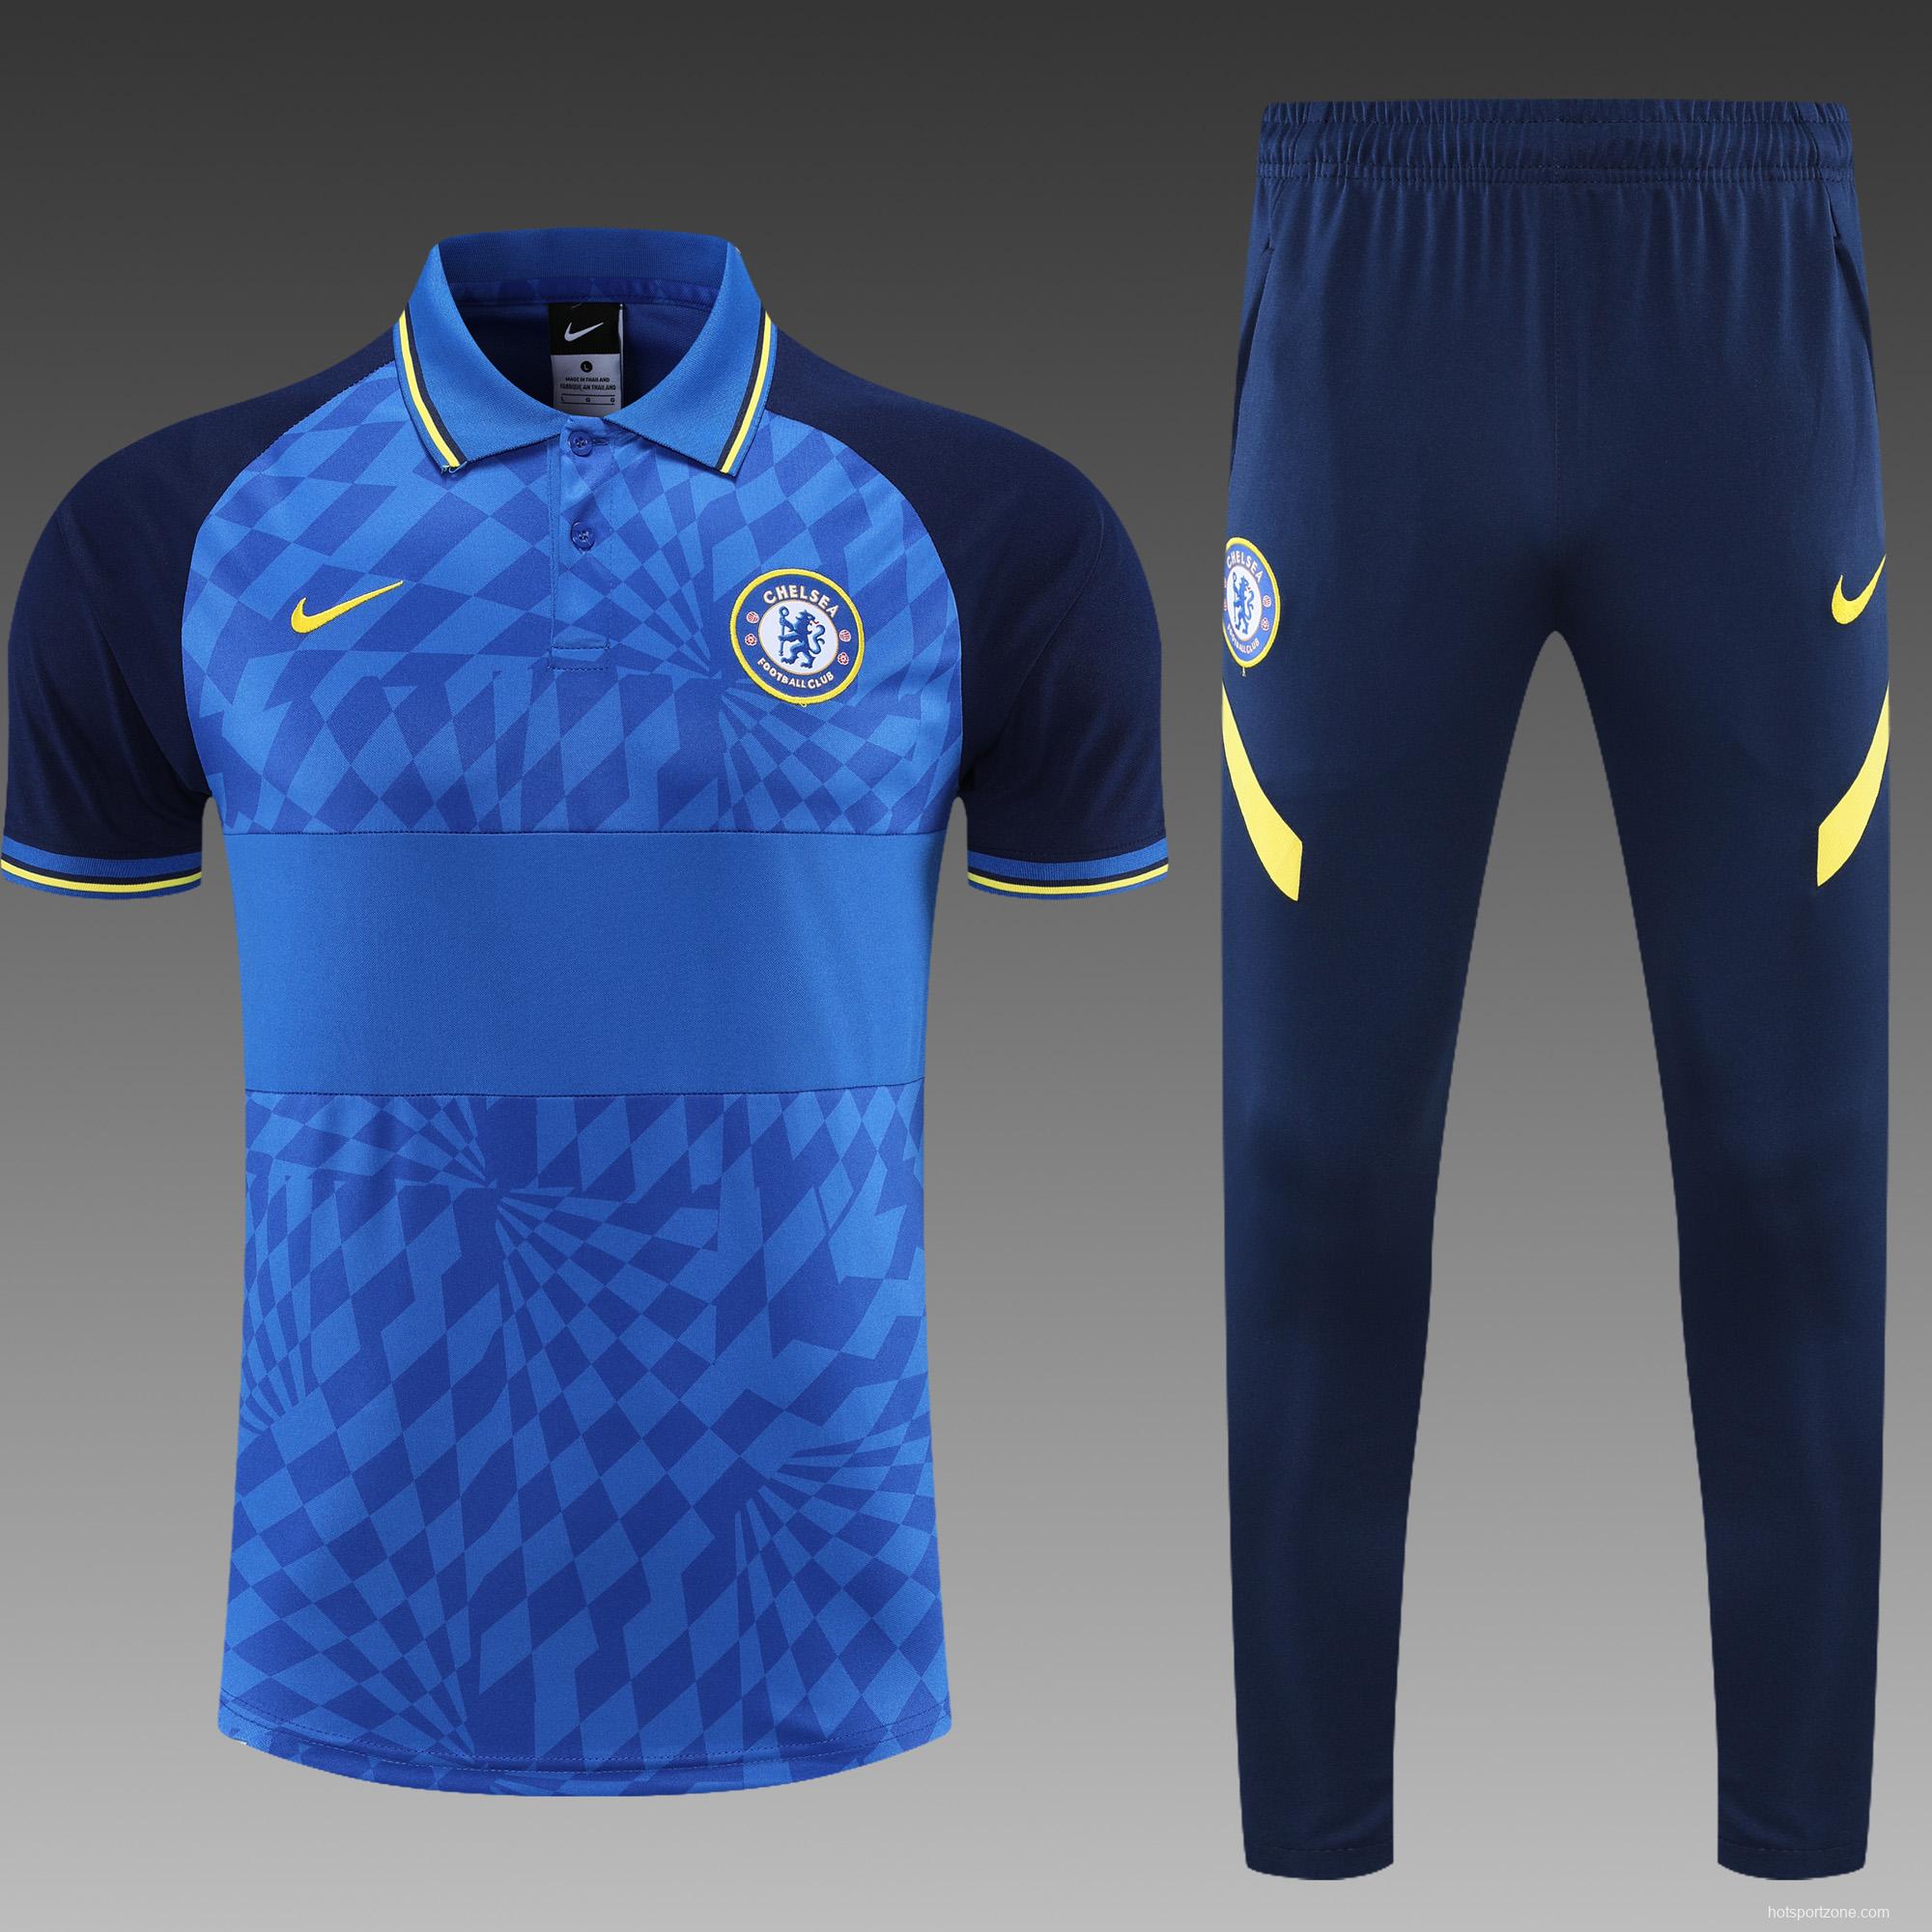 Chelsea POLO kit Dark Blue (not supported to be sold separately)